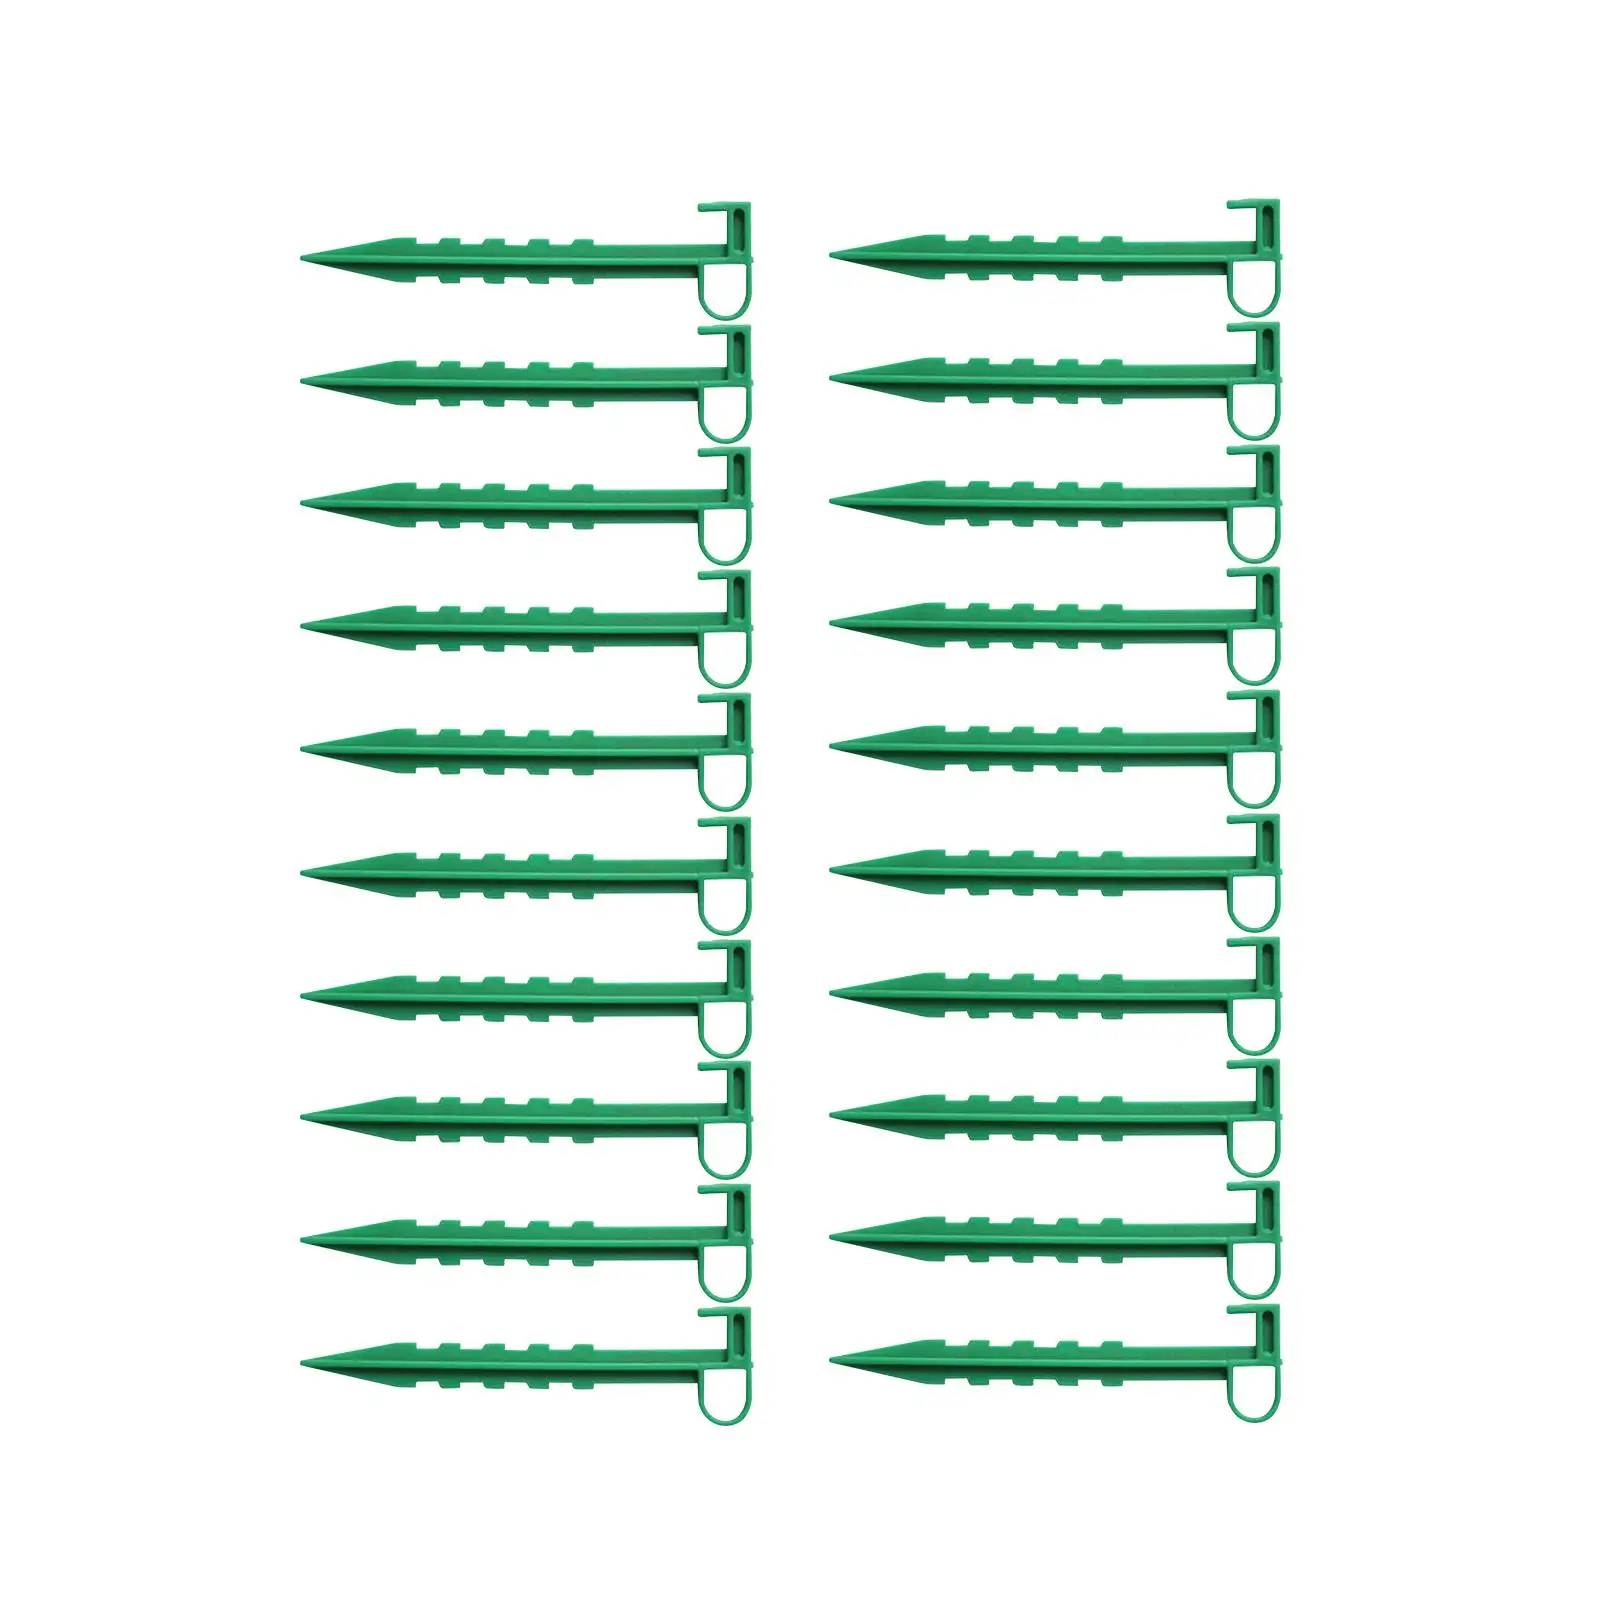 20x Garden Stakes Tarp Stakes Yard Ground Cover Fixing Anchor Pegs for Tents Securing Keeping Garden Netting Down Greenhouse